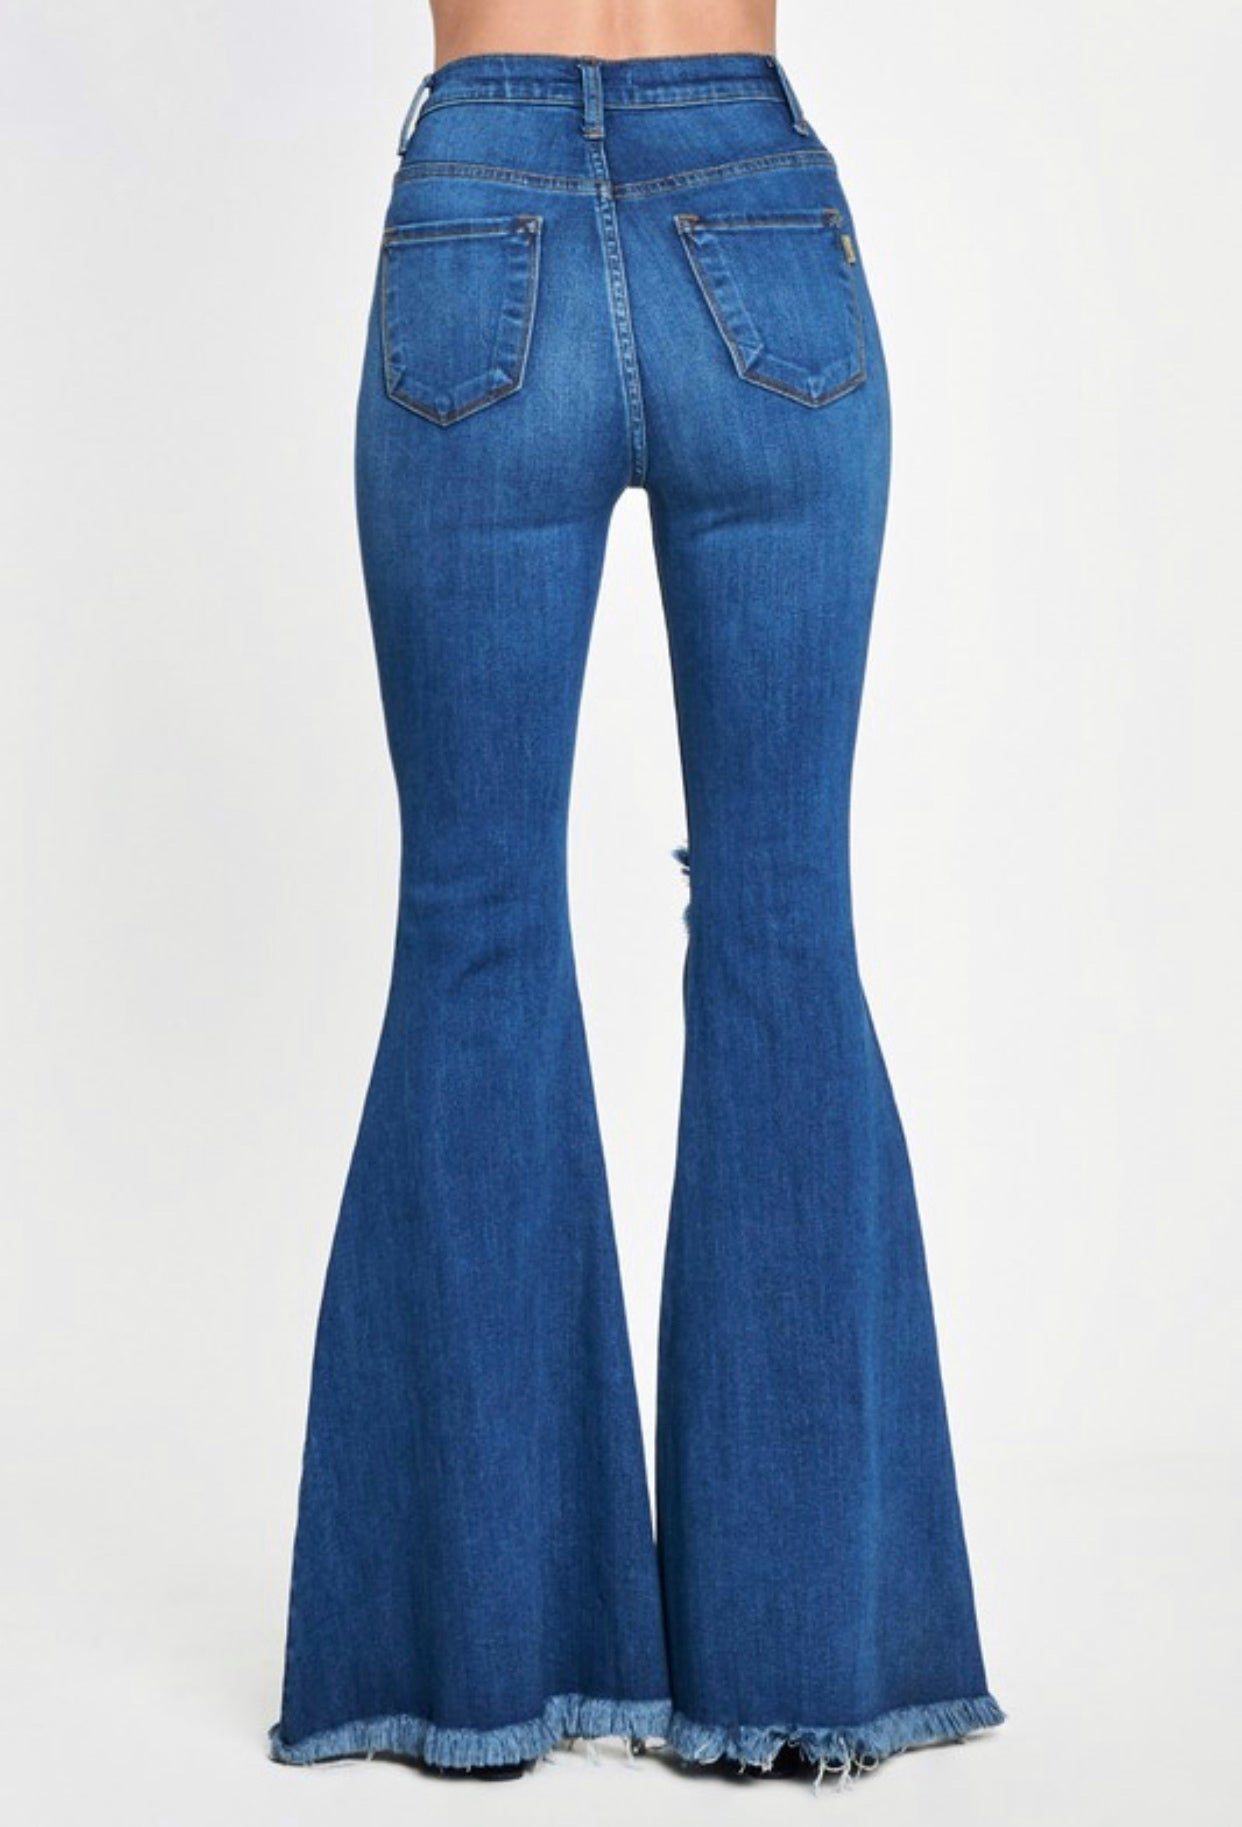 Plus Swept Away Flare Jeans